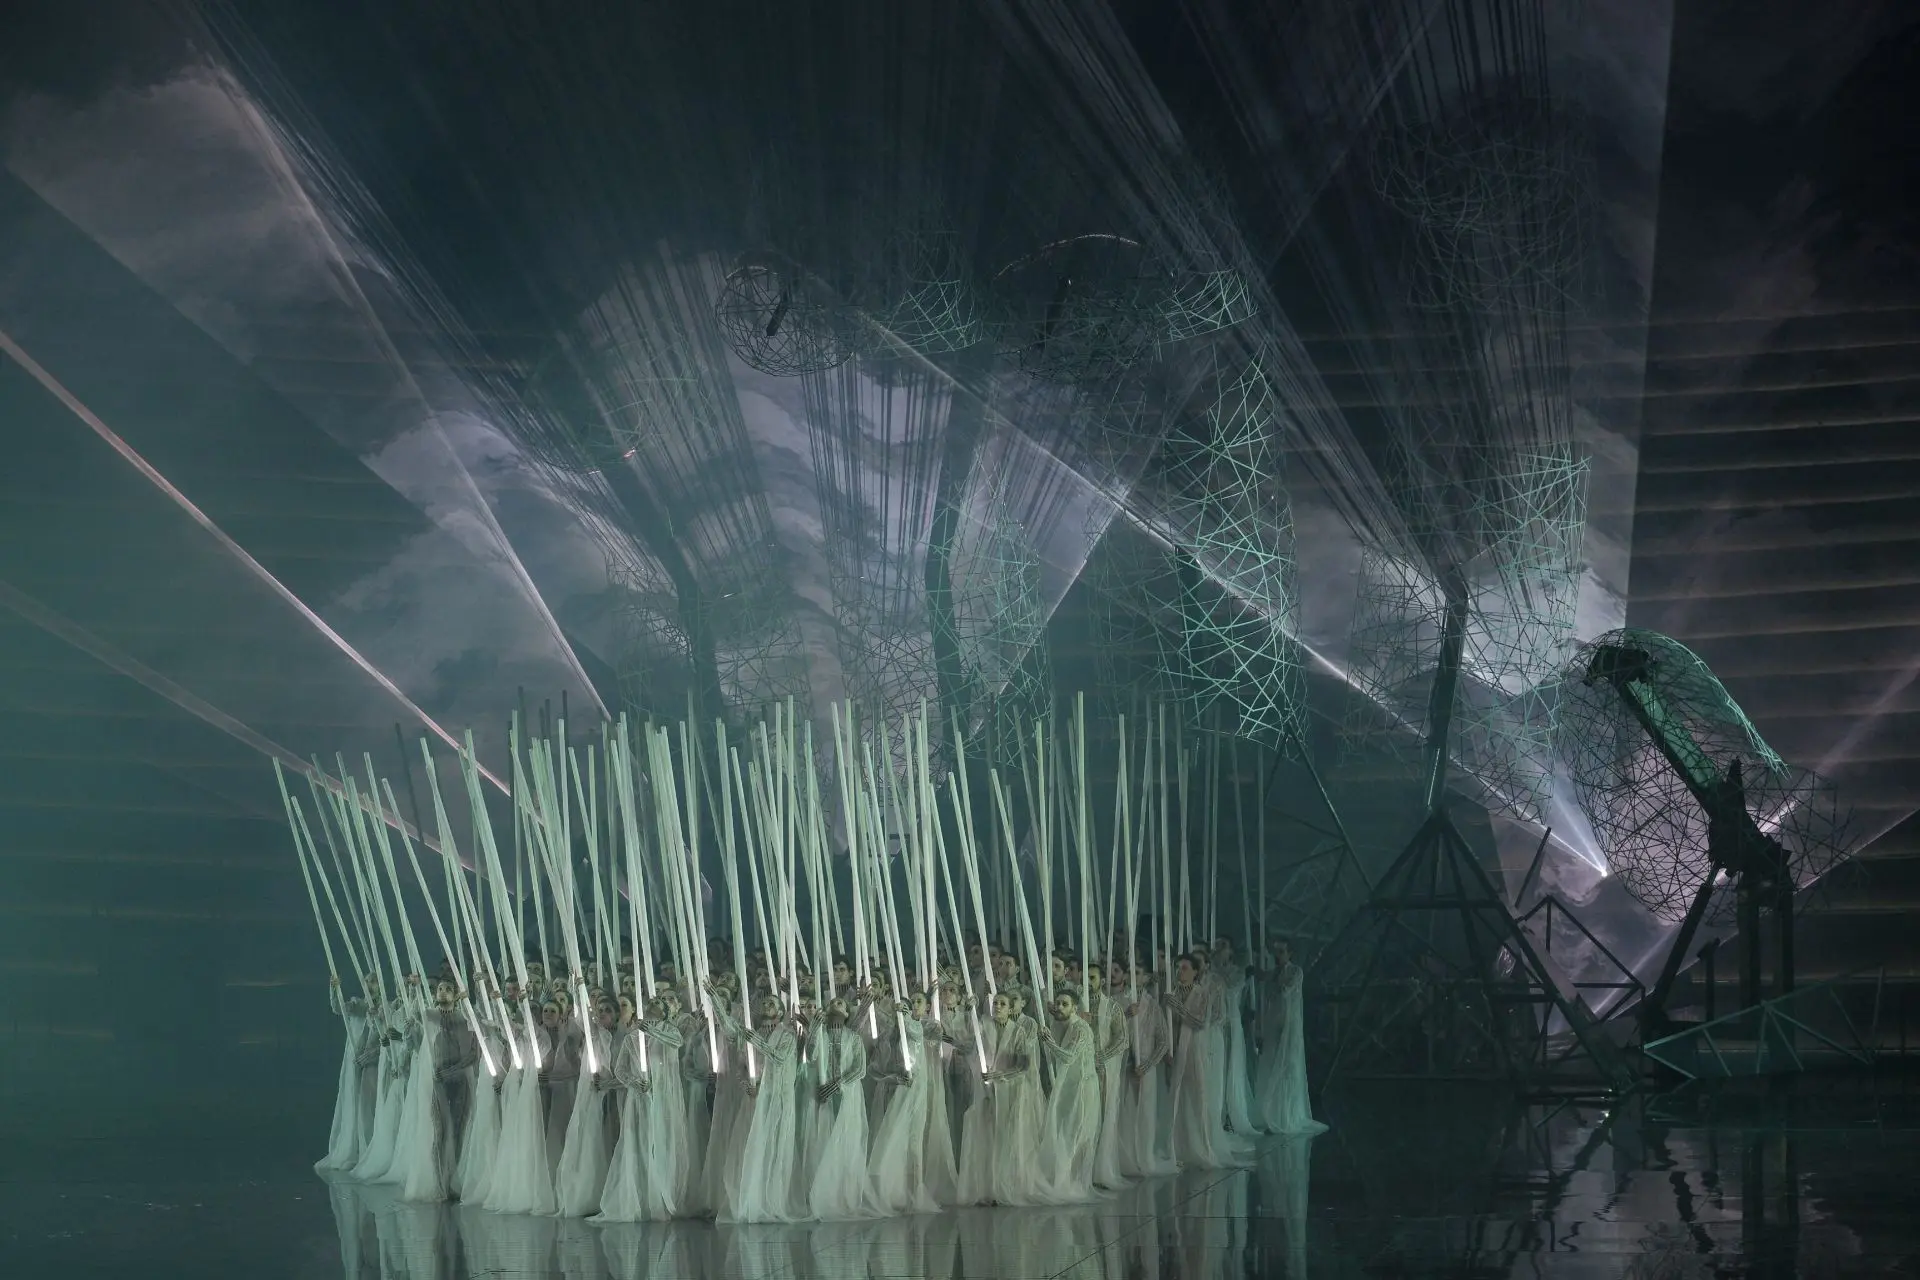 The stage is again dominated by the large hand, illuminated by beams of white light and surrounded by dense clouds of smoke. The male and female dancers are standing next to each other and occupy the center of the stage. On top of their suits they are now wearing long white robes made of tulle. In their hands, they are holding long white illuminated staffs, similar to laser swords. They are held pointing upwards. 